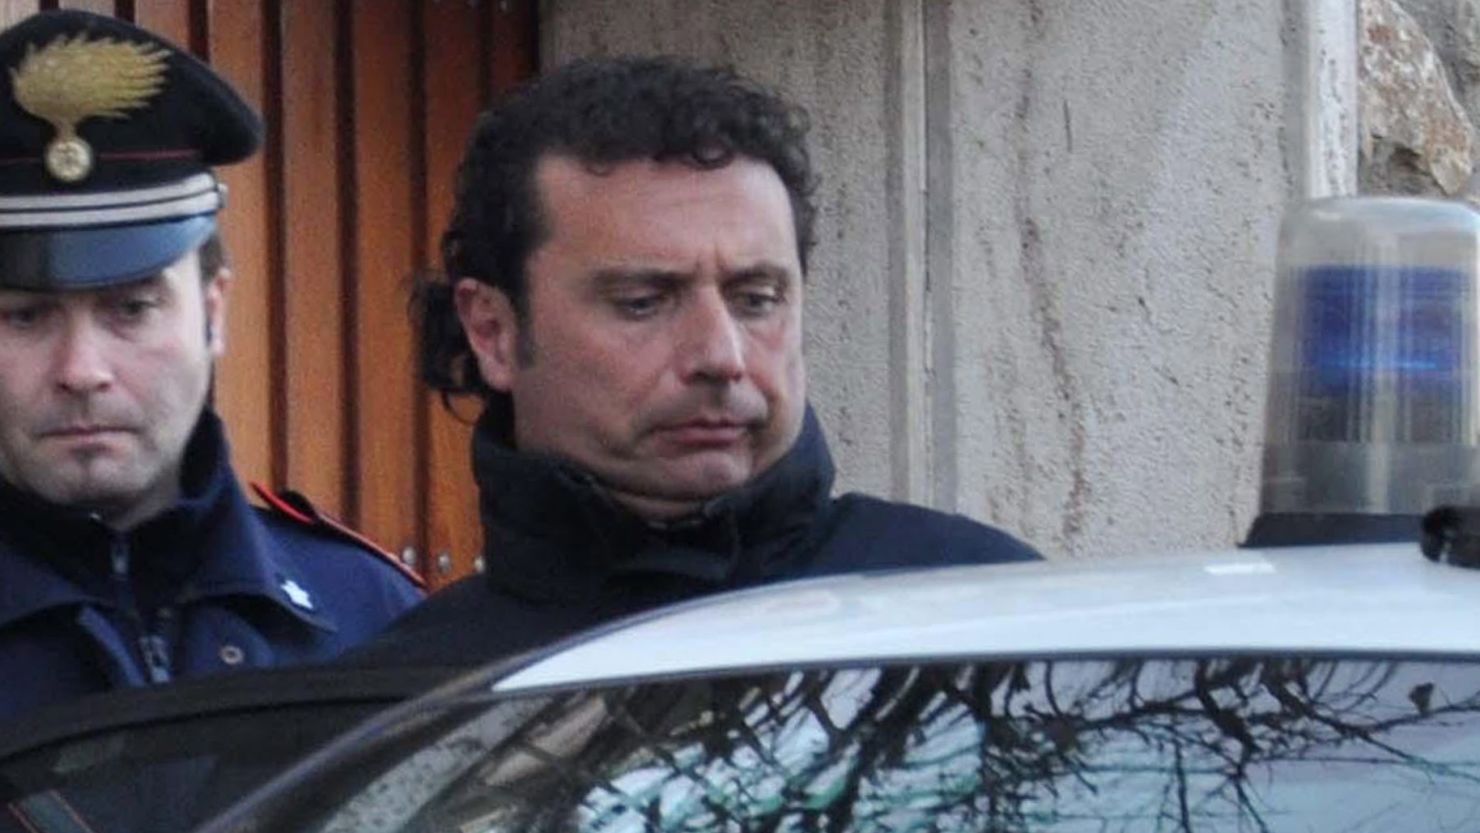 Captain of the Costa Concordia cruise liner Francesco Schettino is escorted by an Italian policeman in Grosseto earlier this year